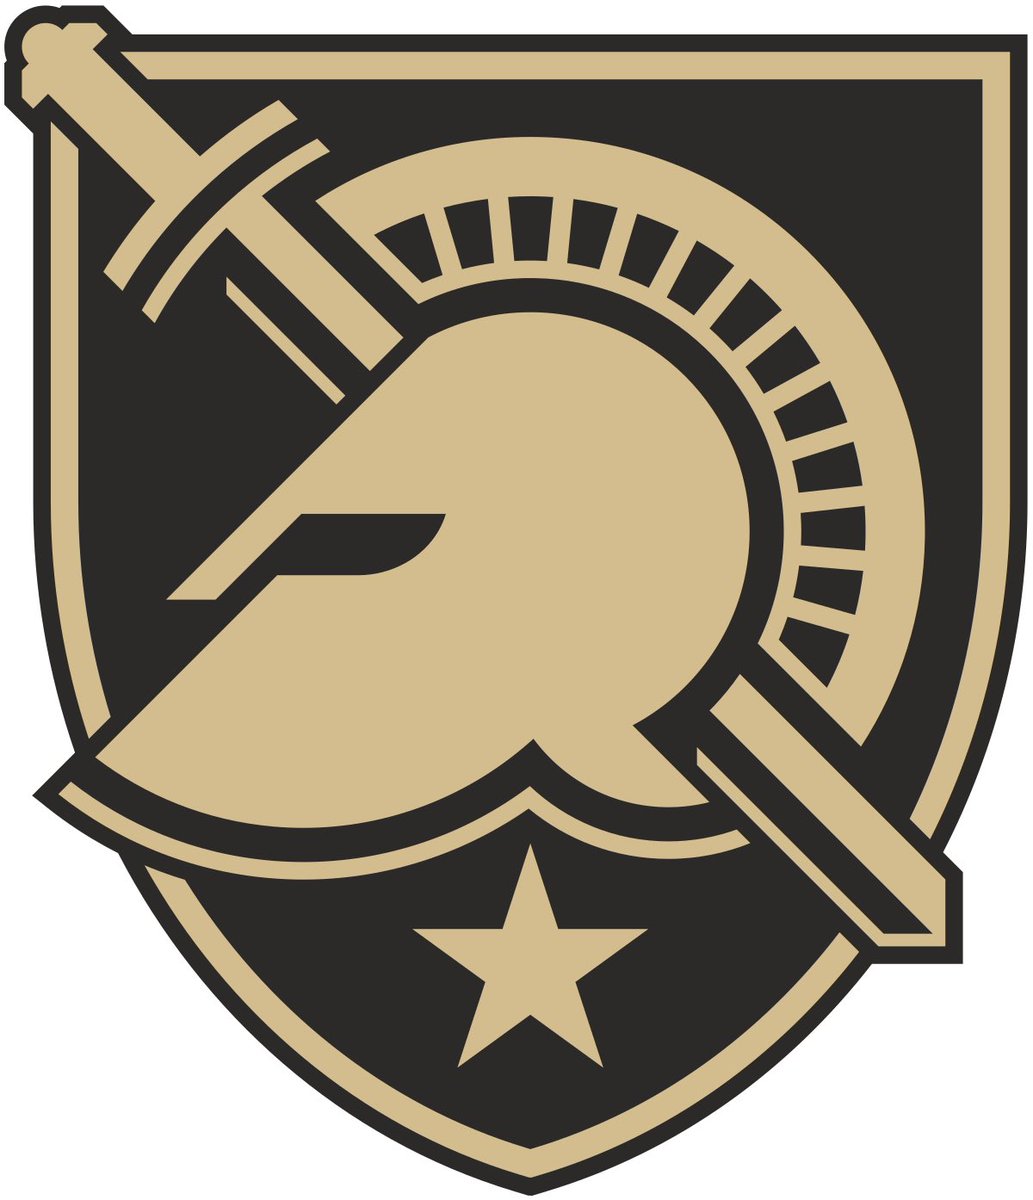 After an amazing phone call with @CoachBPowers, I am blessed to receive my 9th D1 offer from Army West Point. @ArmyWP_Football @FootballPerkins @Coach_Santoro @coachdost